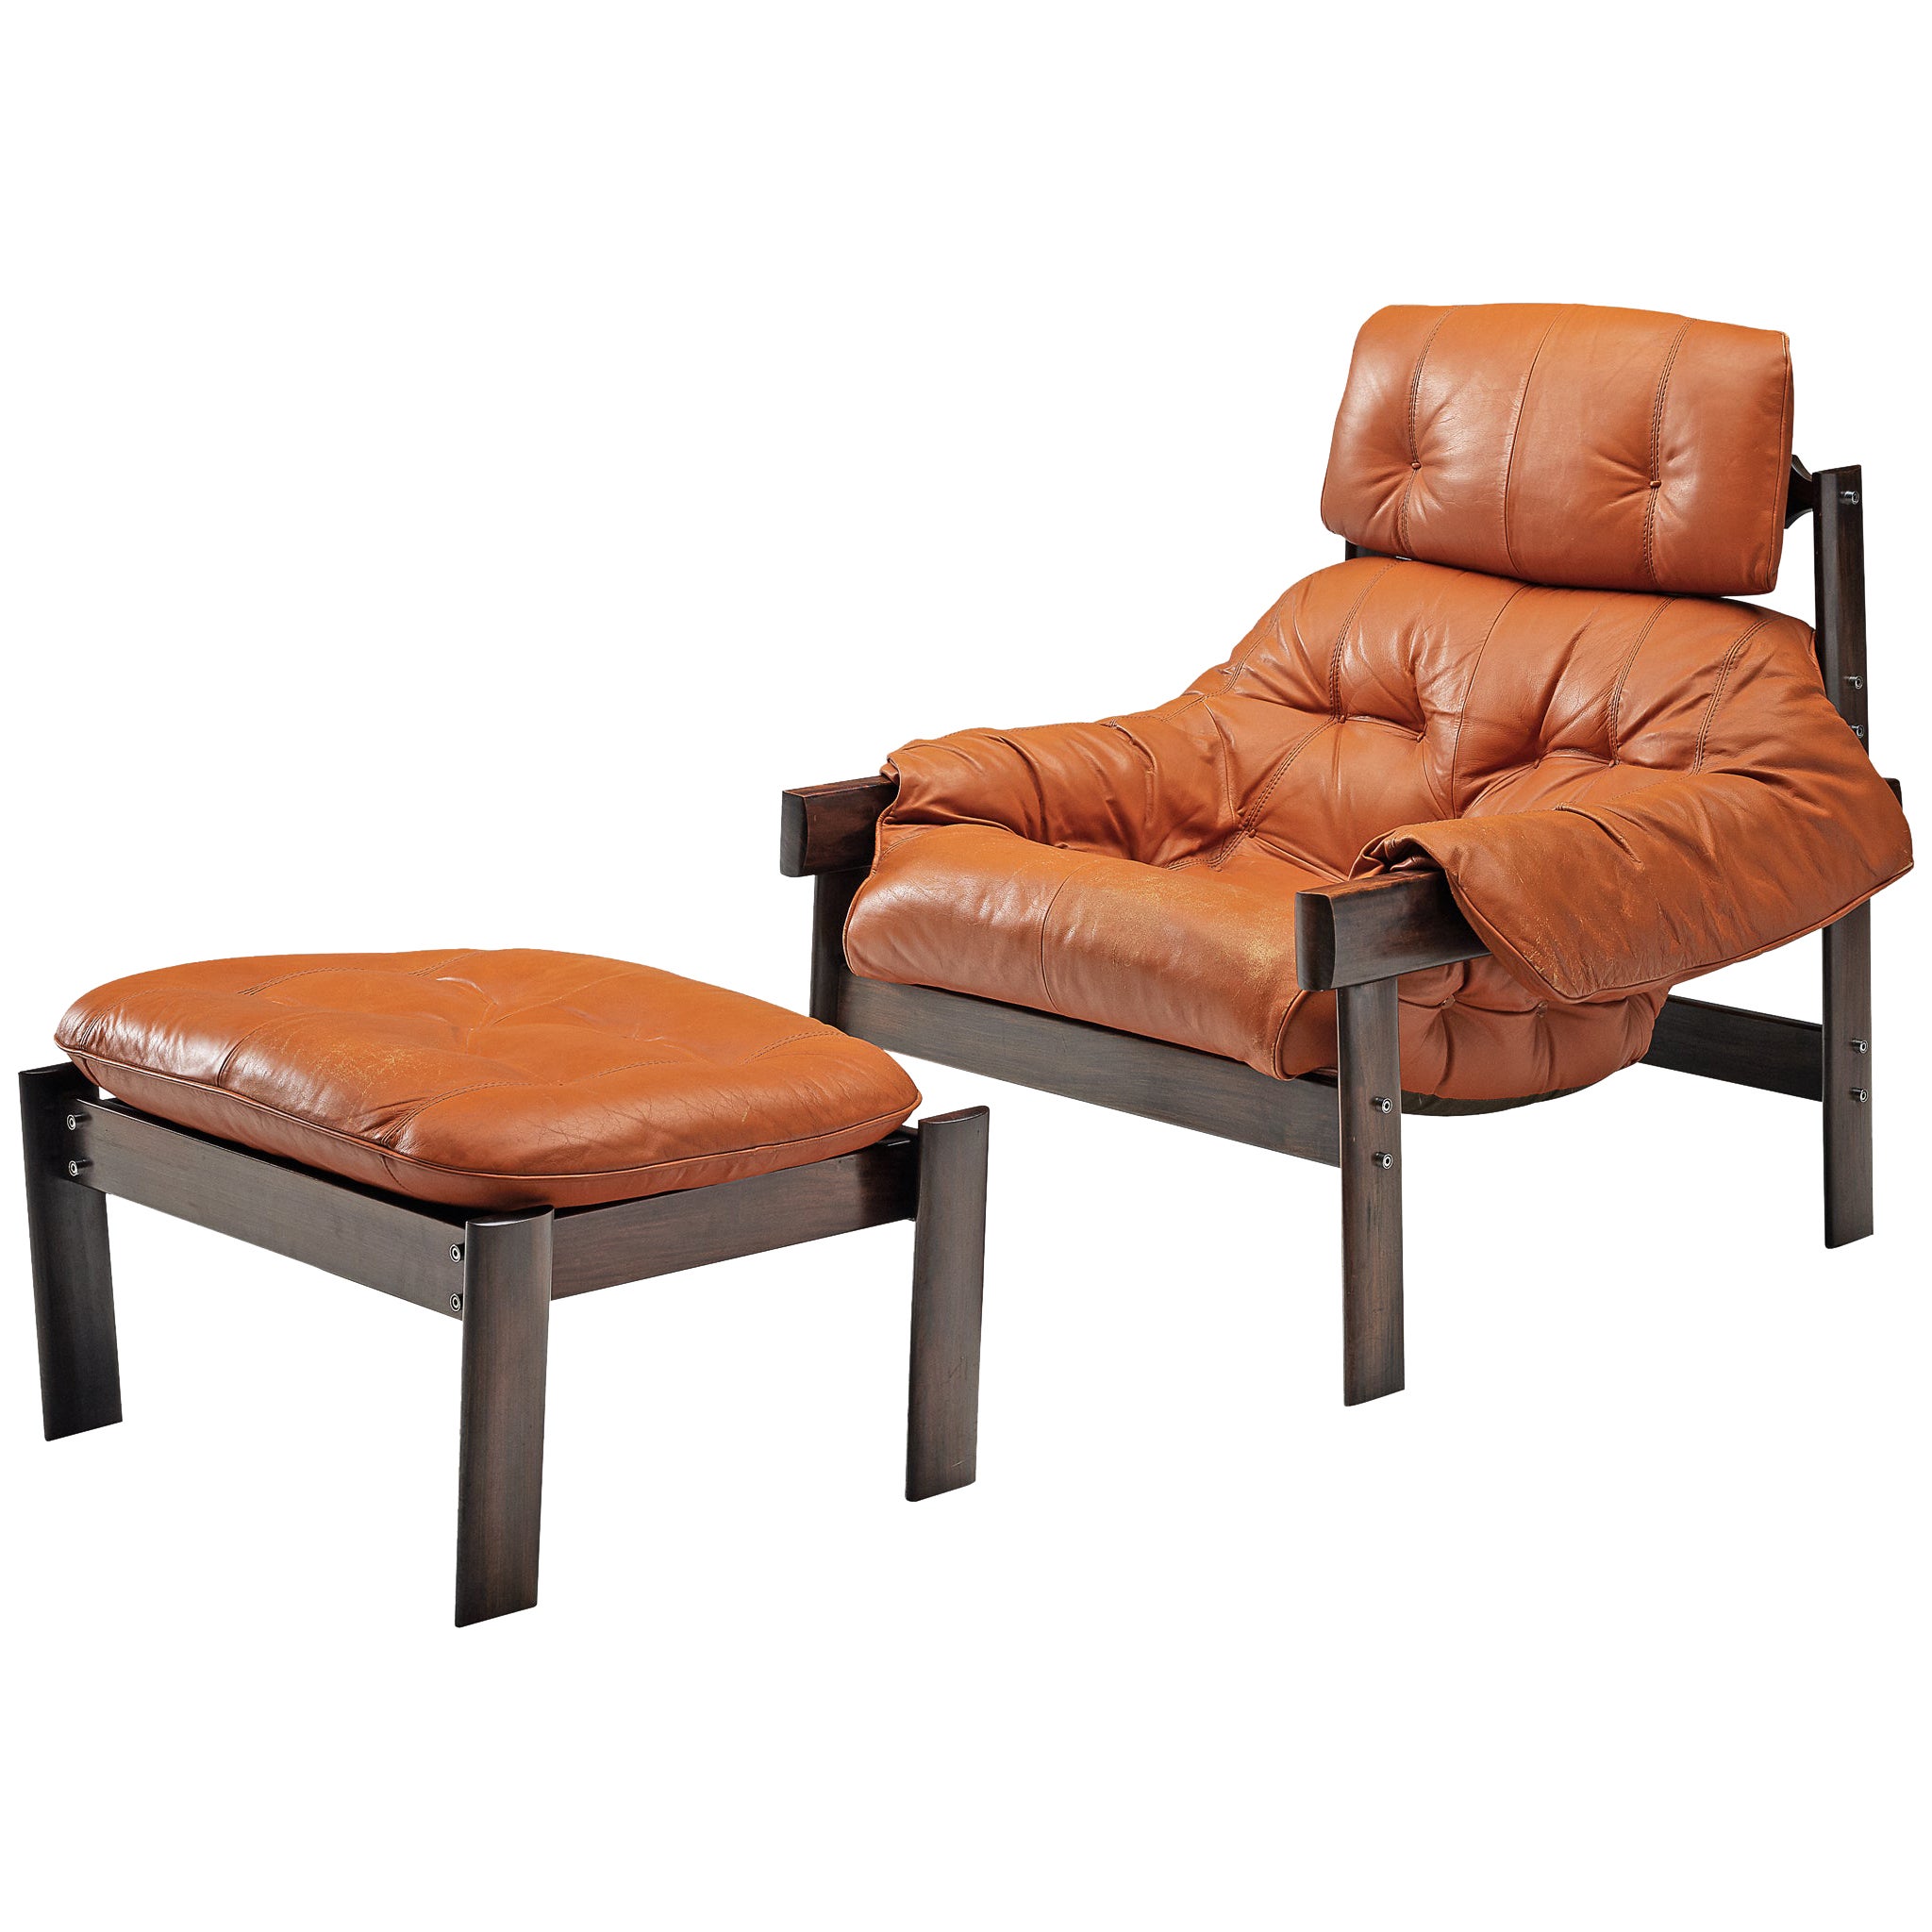 Percival Lafer 'MP-41' Lounge Chair with Ottoman in Leather